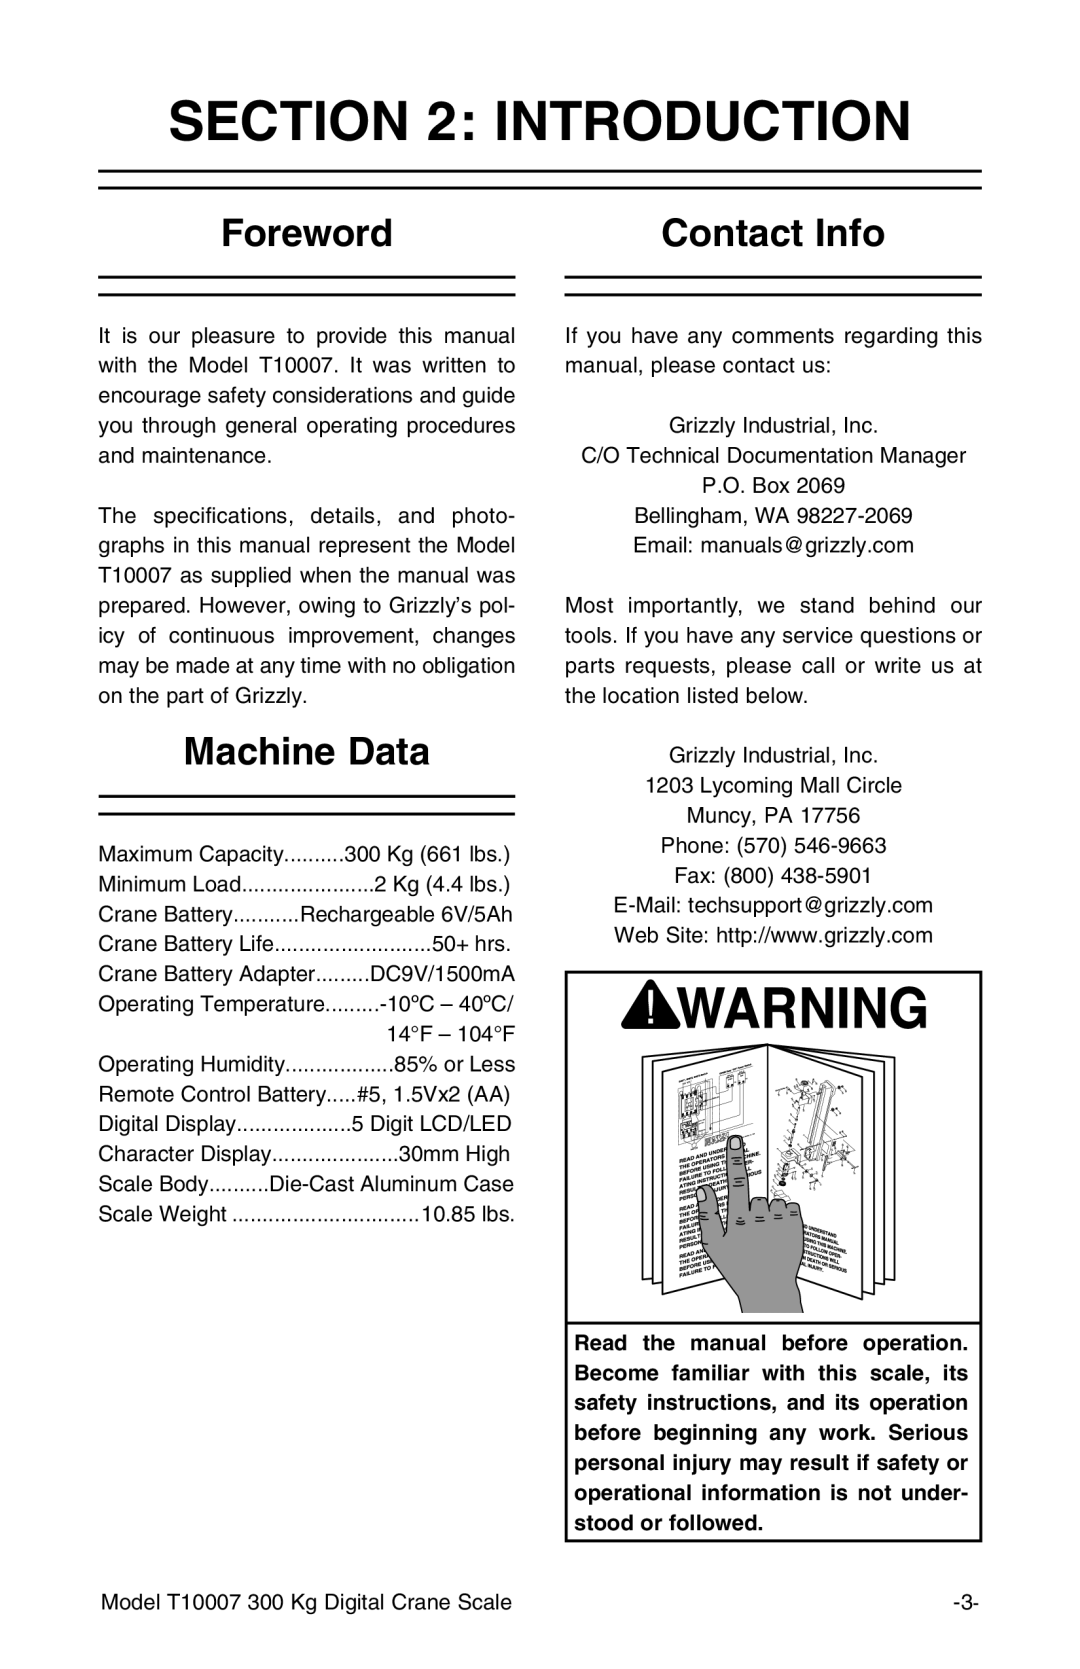 Grizzly T10007 owner manual Introduction, Foreword, Contact Info, Machine Data 